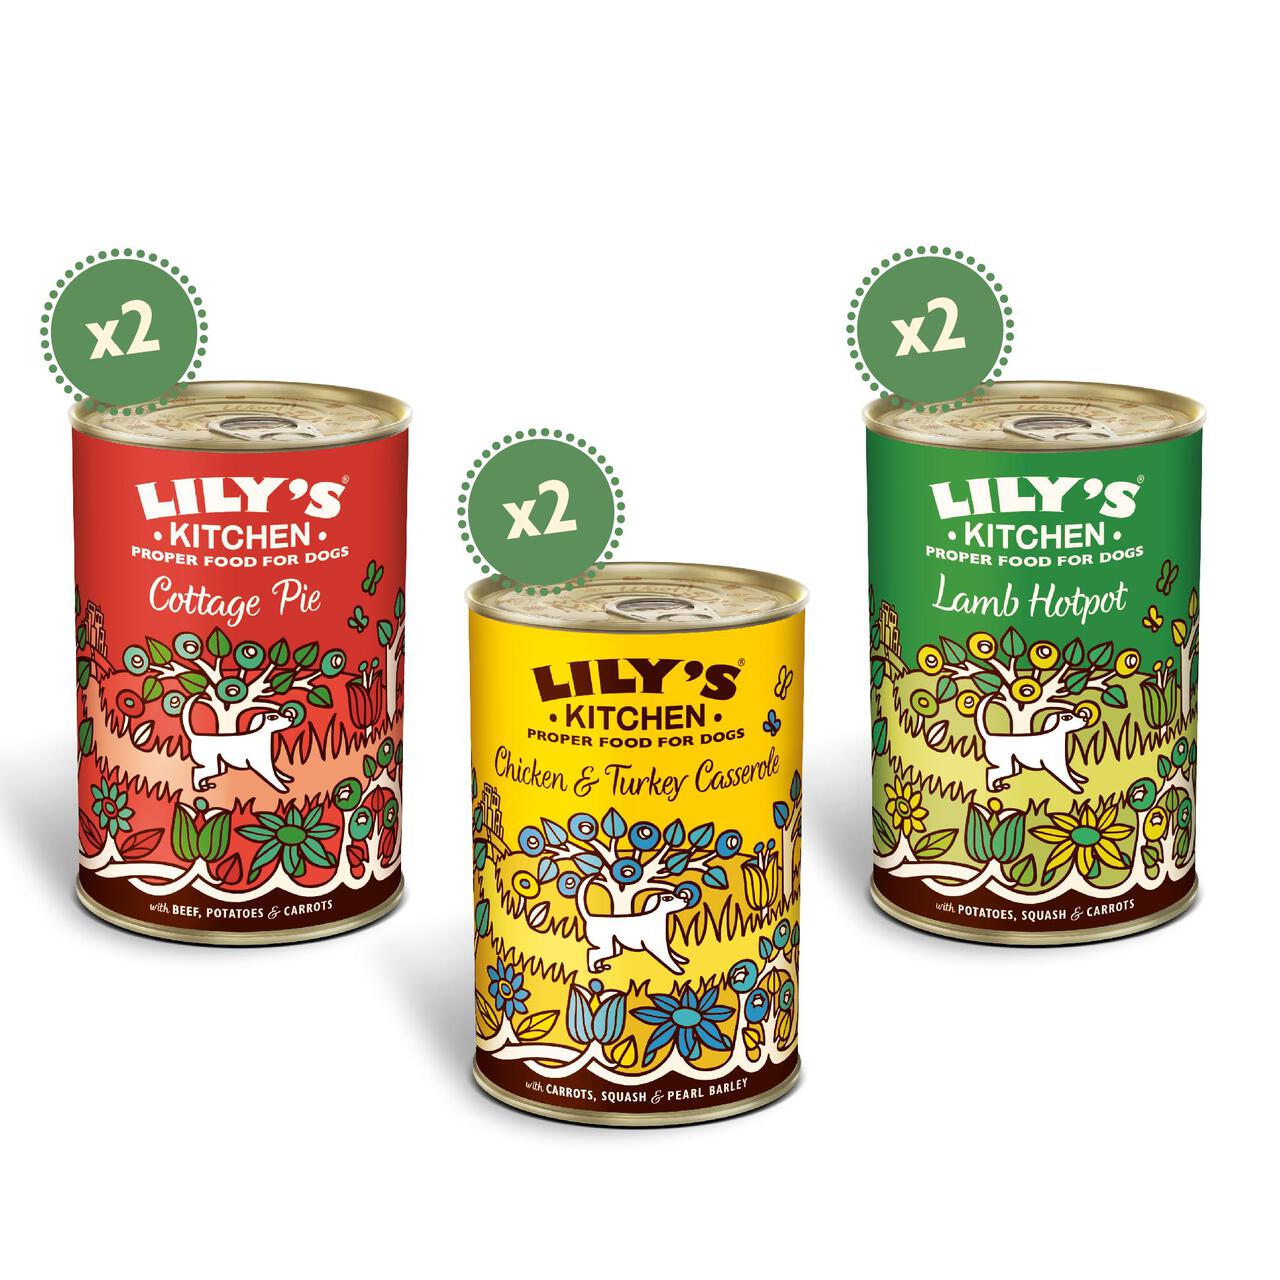 Lily's Kitchen Classic Recipes for Dogs Multipack 6 x 400g